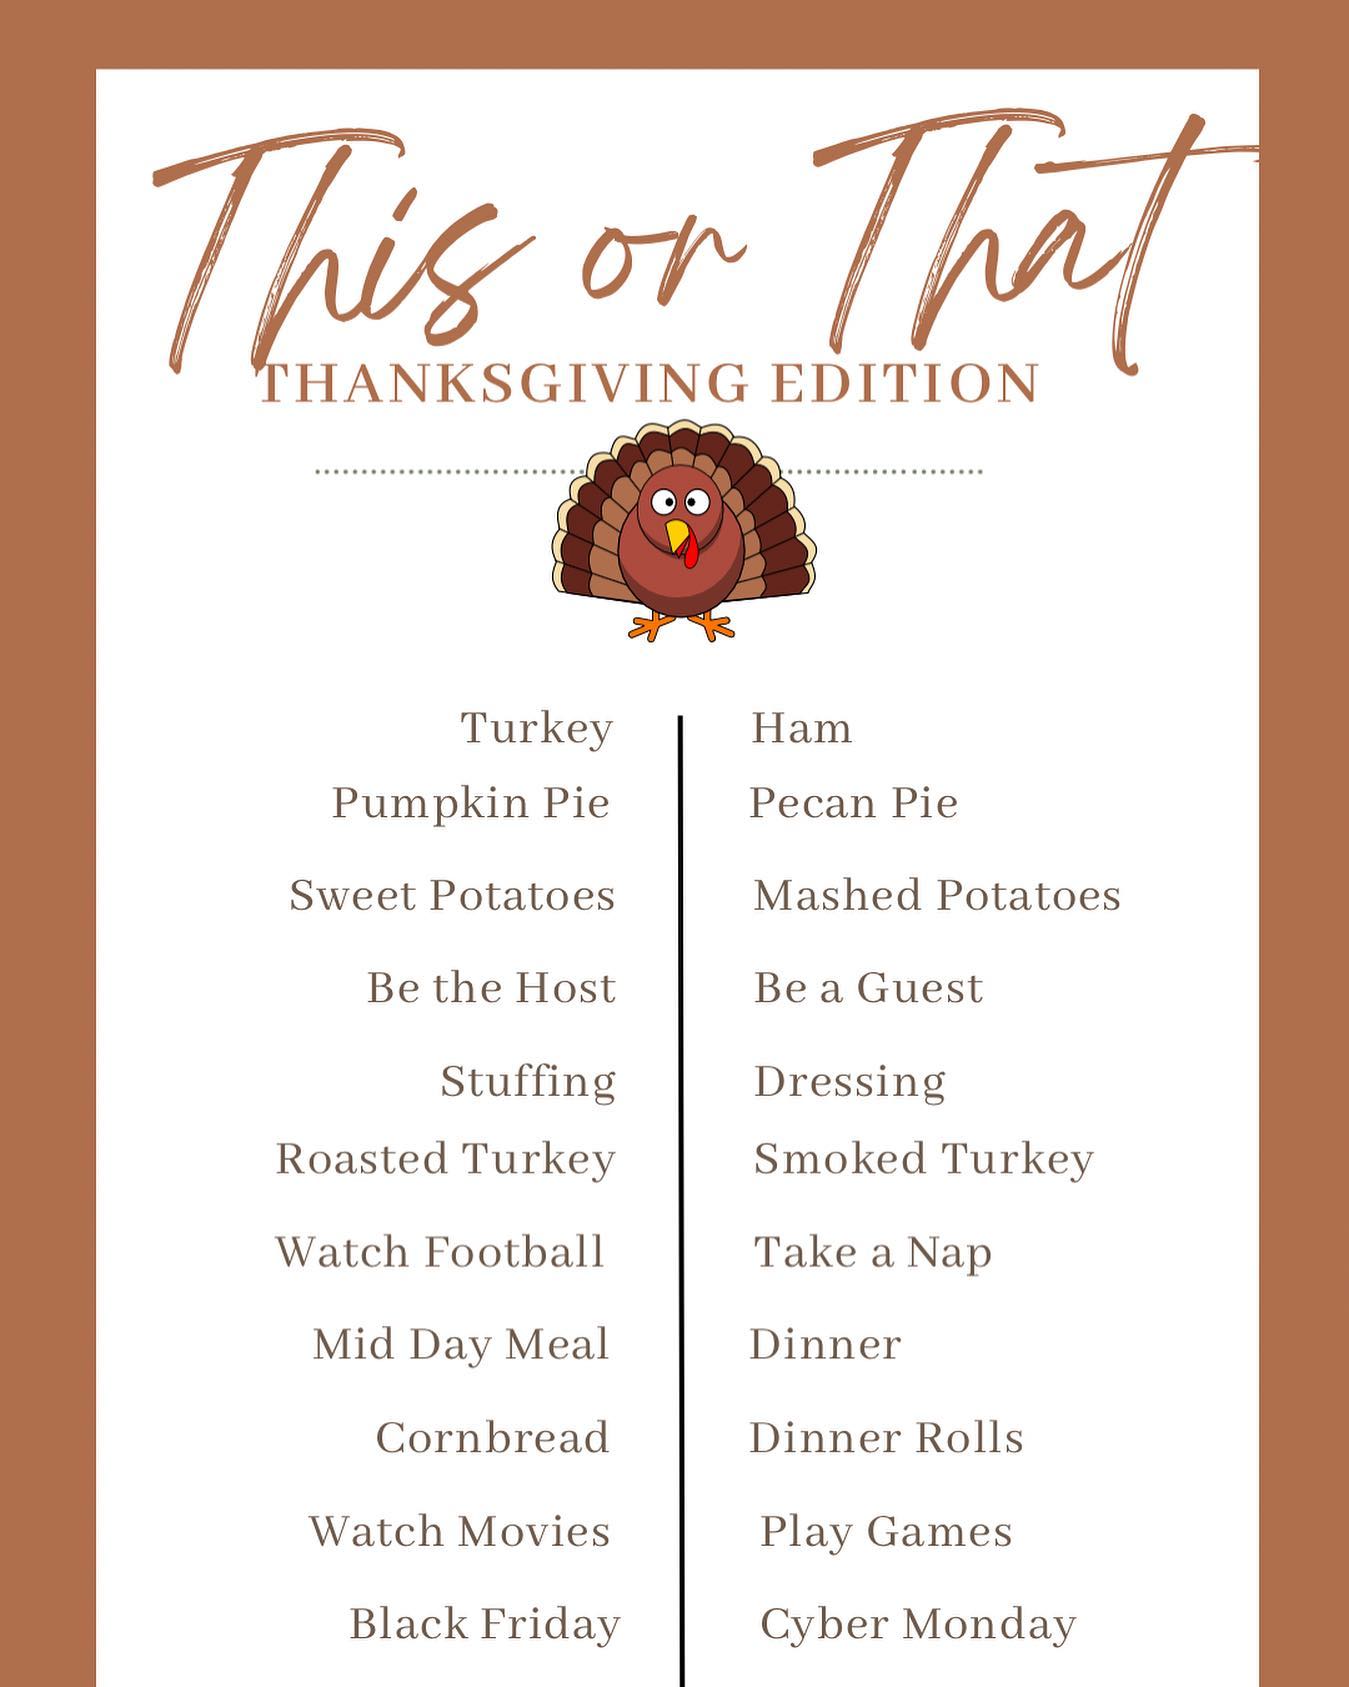 🦃 Gobble Gobble! That’s turkey talk for Happy Thanksgiving! Head over to my templates highlight to save and share, make sure to tag me so I can see your answers! Leave me a comment on what you’re thankful for!

#thanksgiving #thisorthatgame #thanksgivingdinner #turkeydinner #gameday #gobblegobble